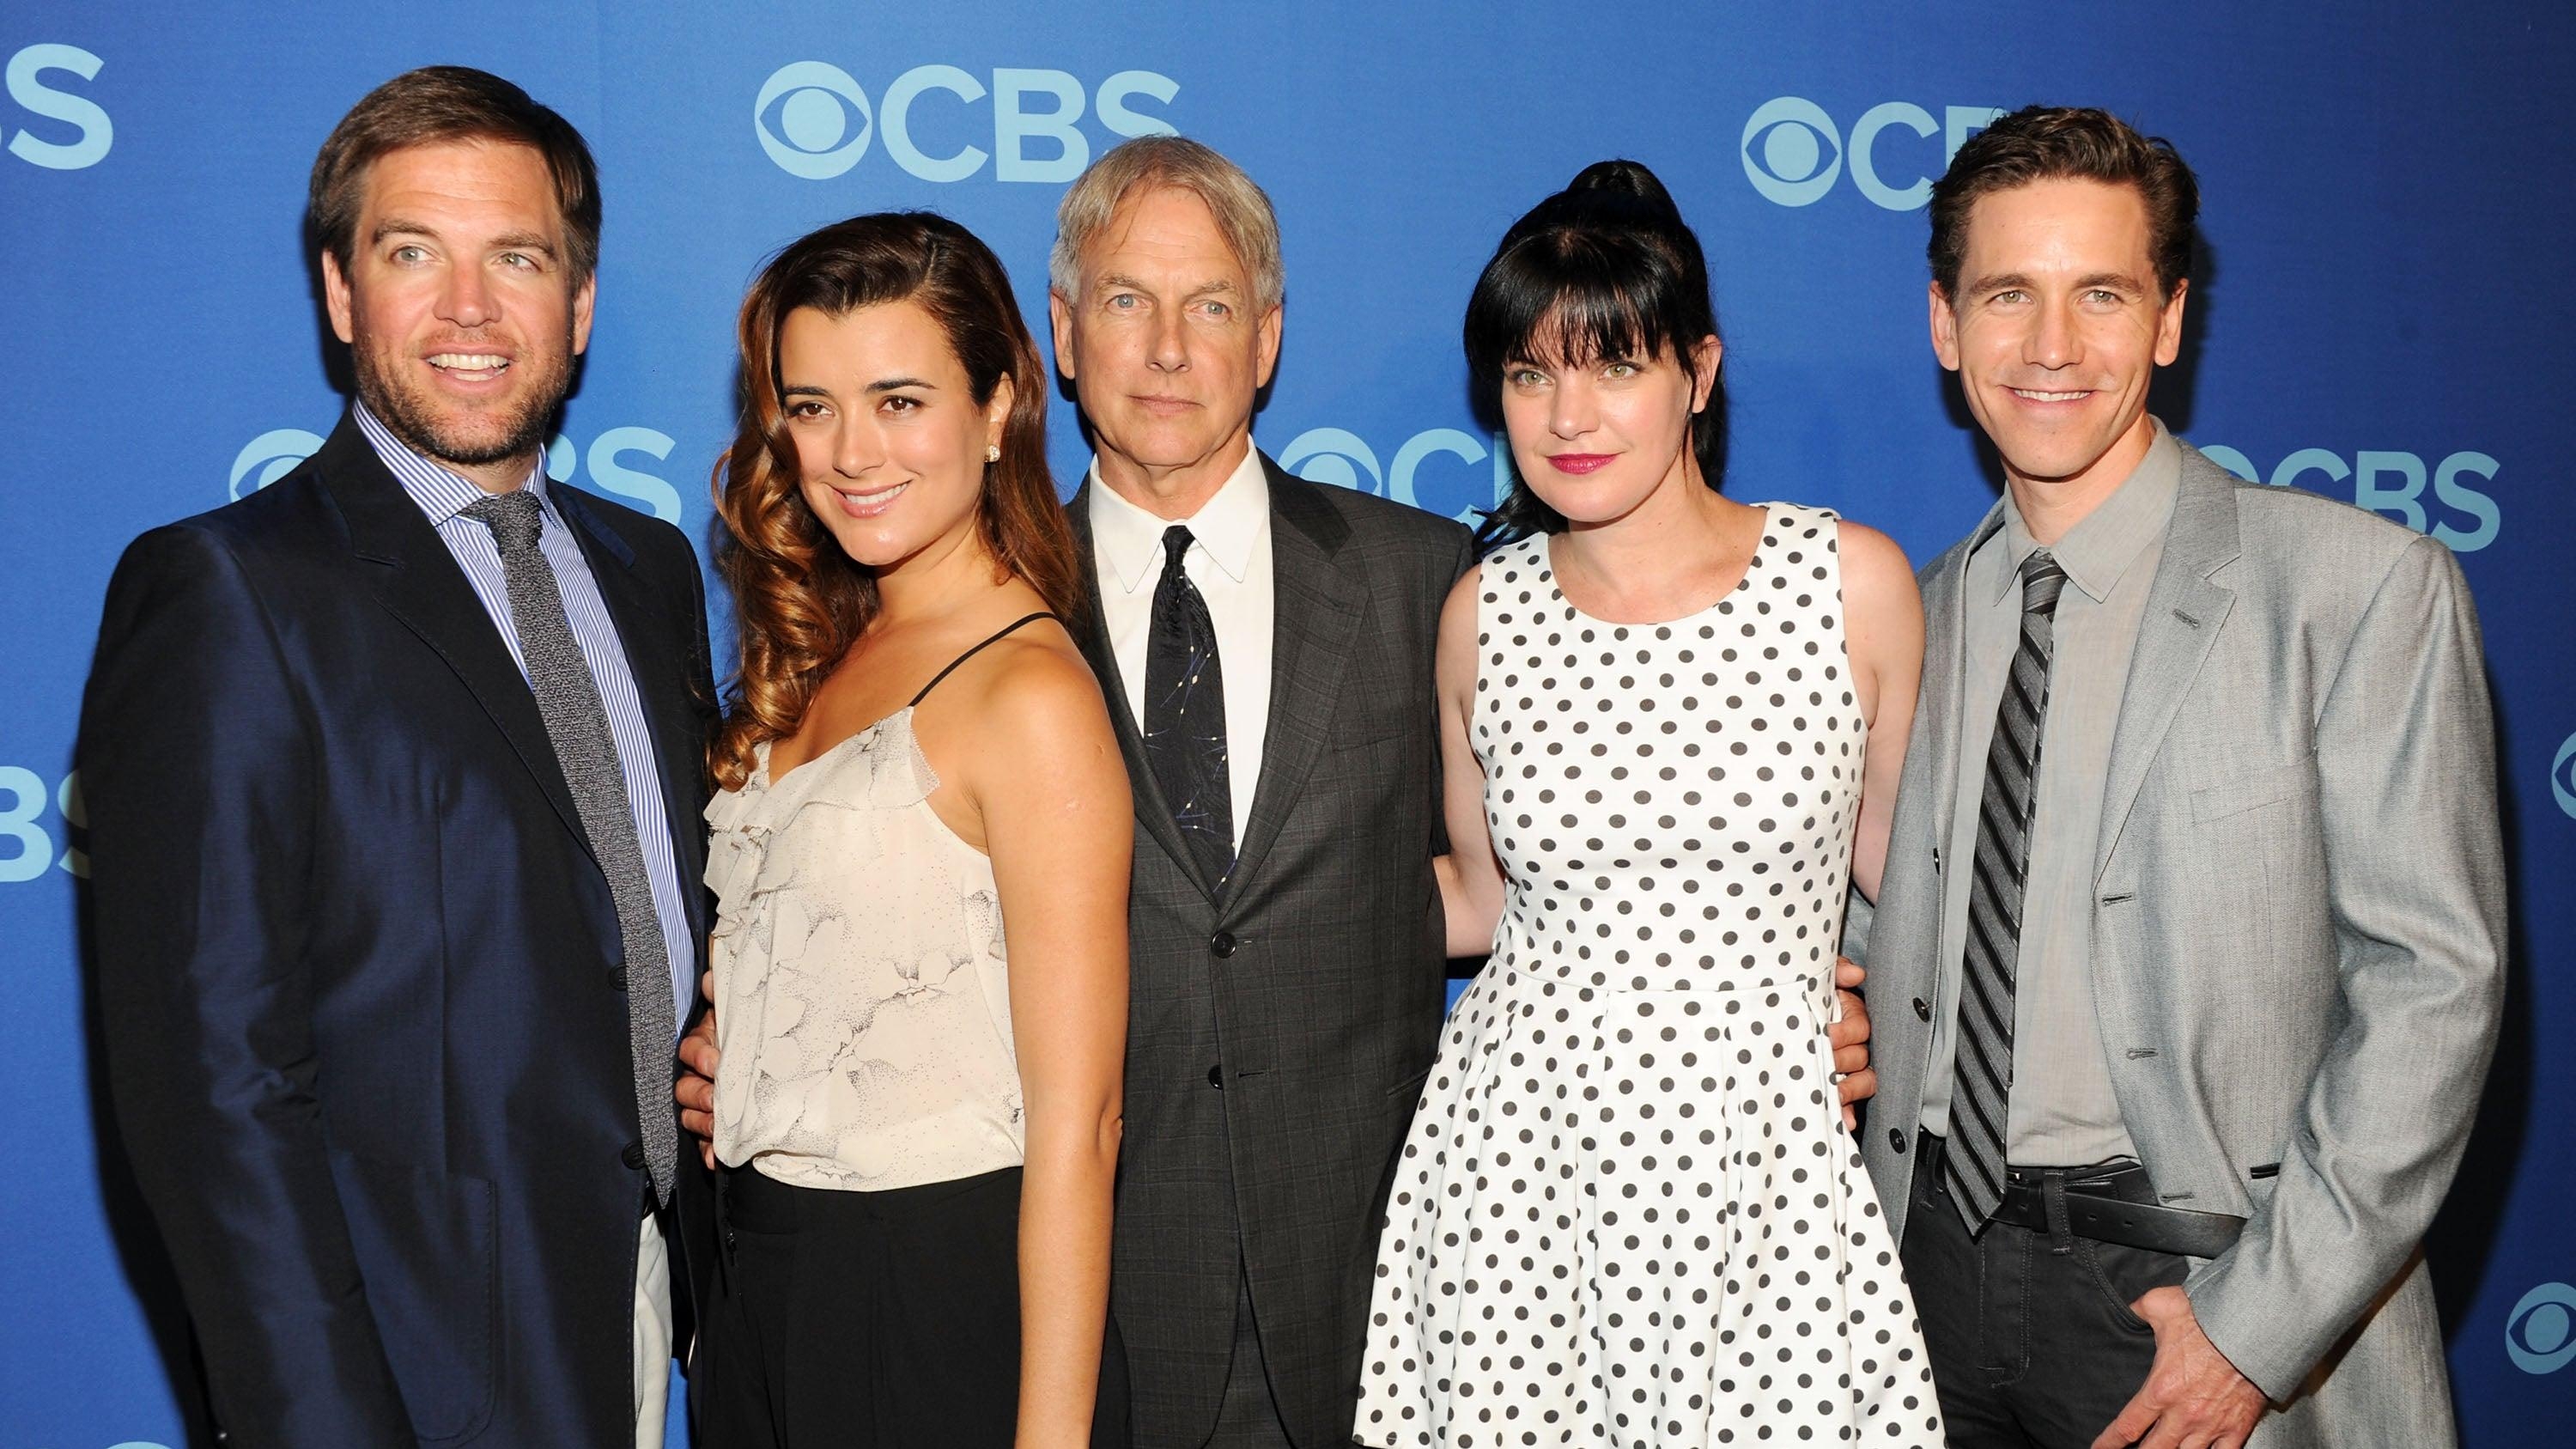 Mark Harmon leaves NCIS after 18 years on the show